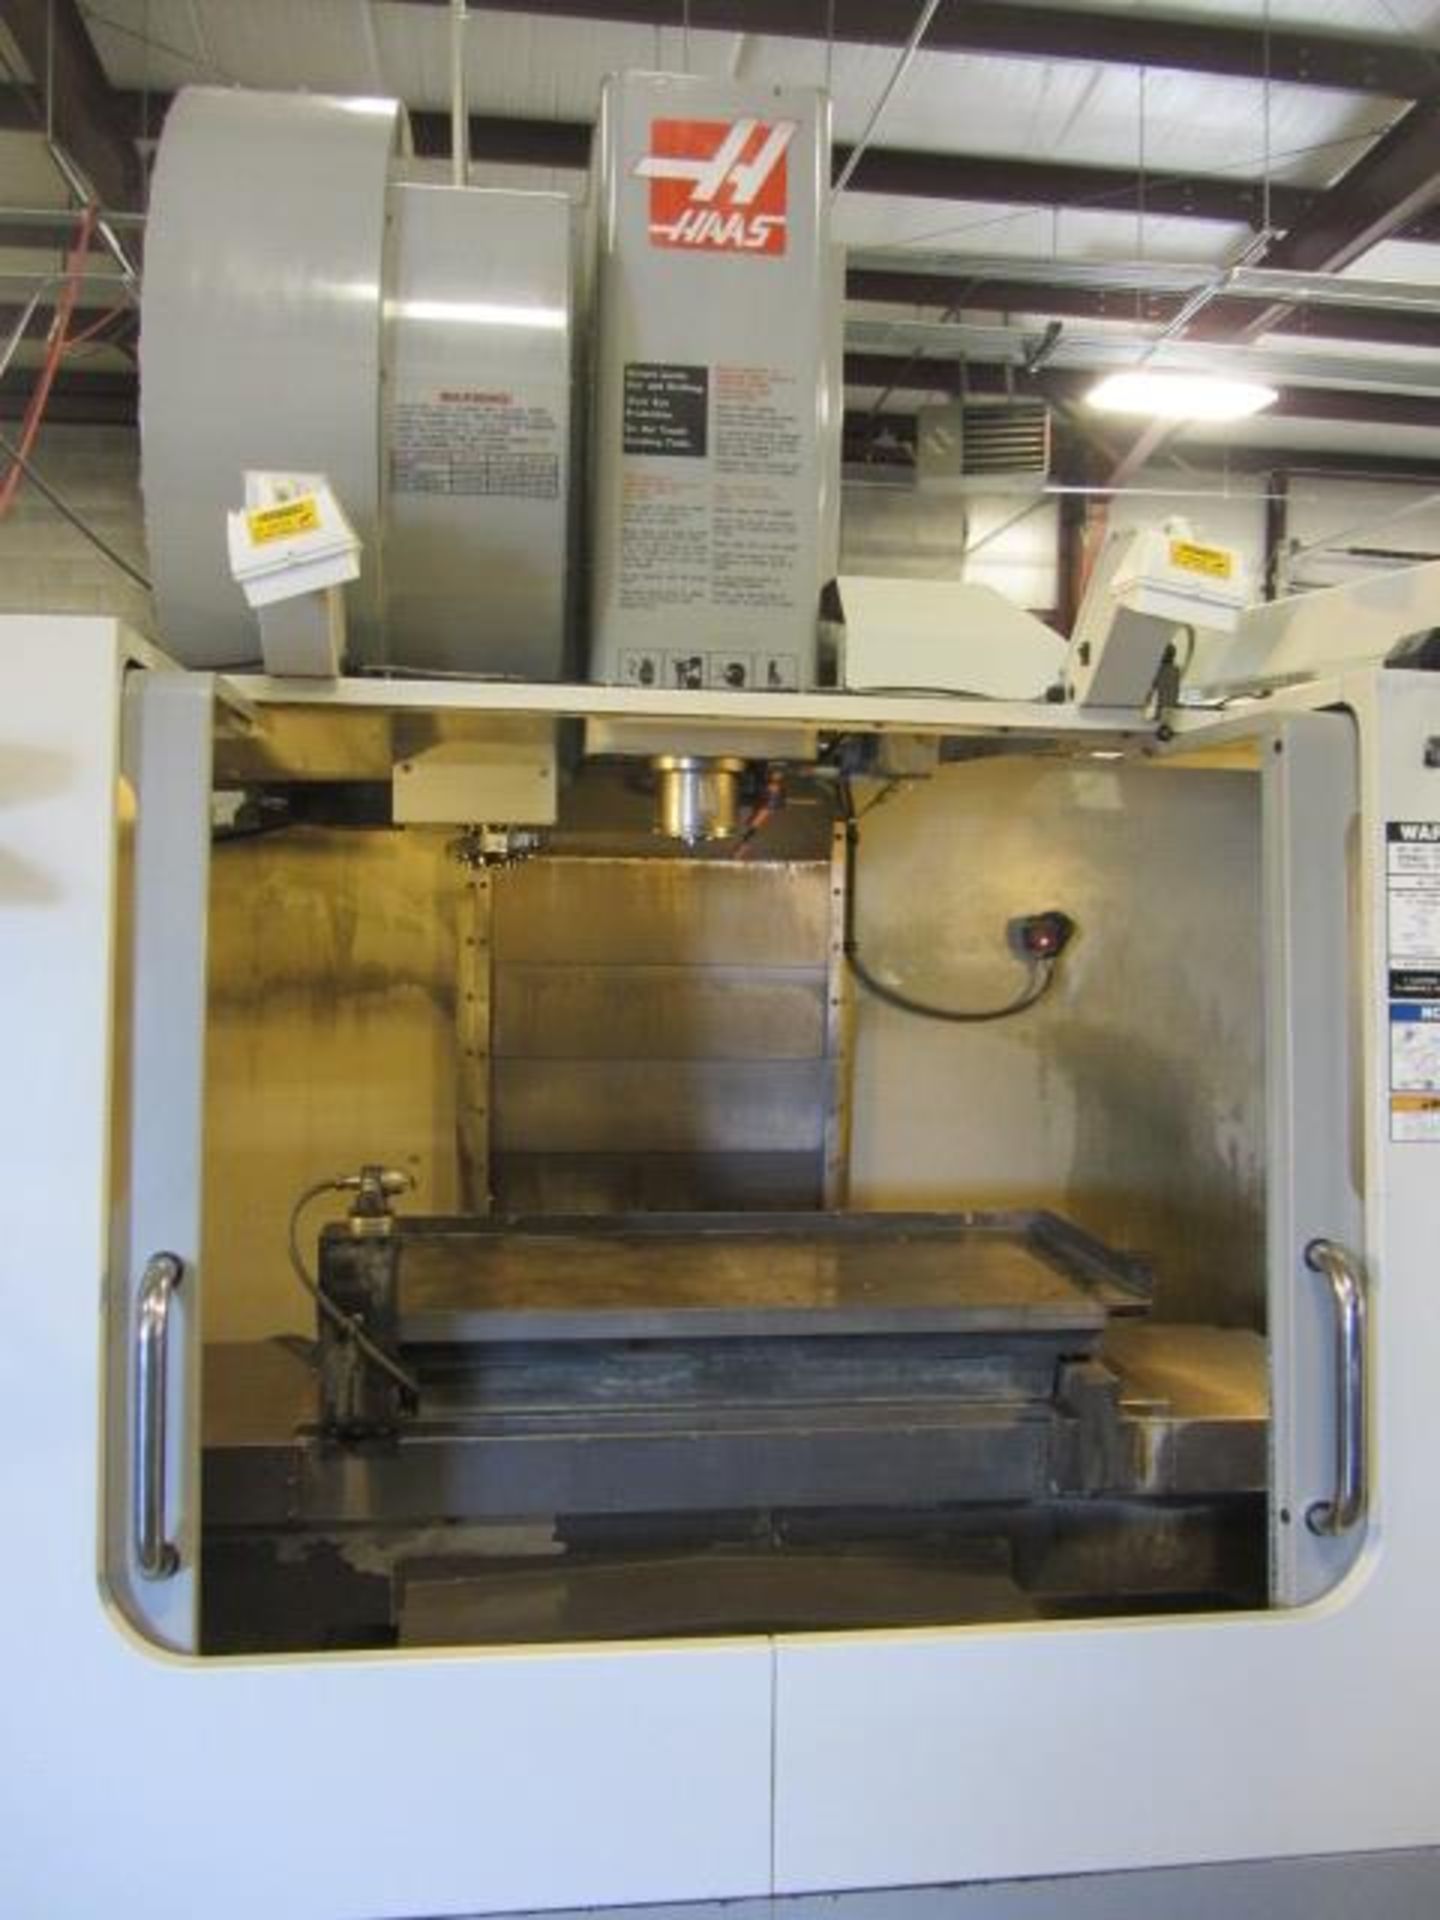 Haas VF3DAPC 4-Axis CNC Vertical Machining Center with Dual Pallet Changer, Intuitive Probing, - Image 5 of 10